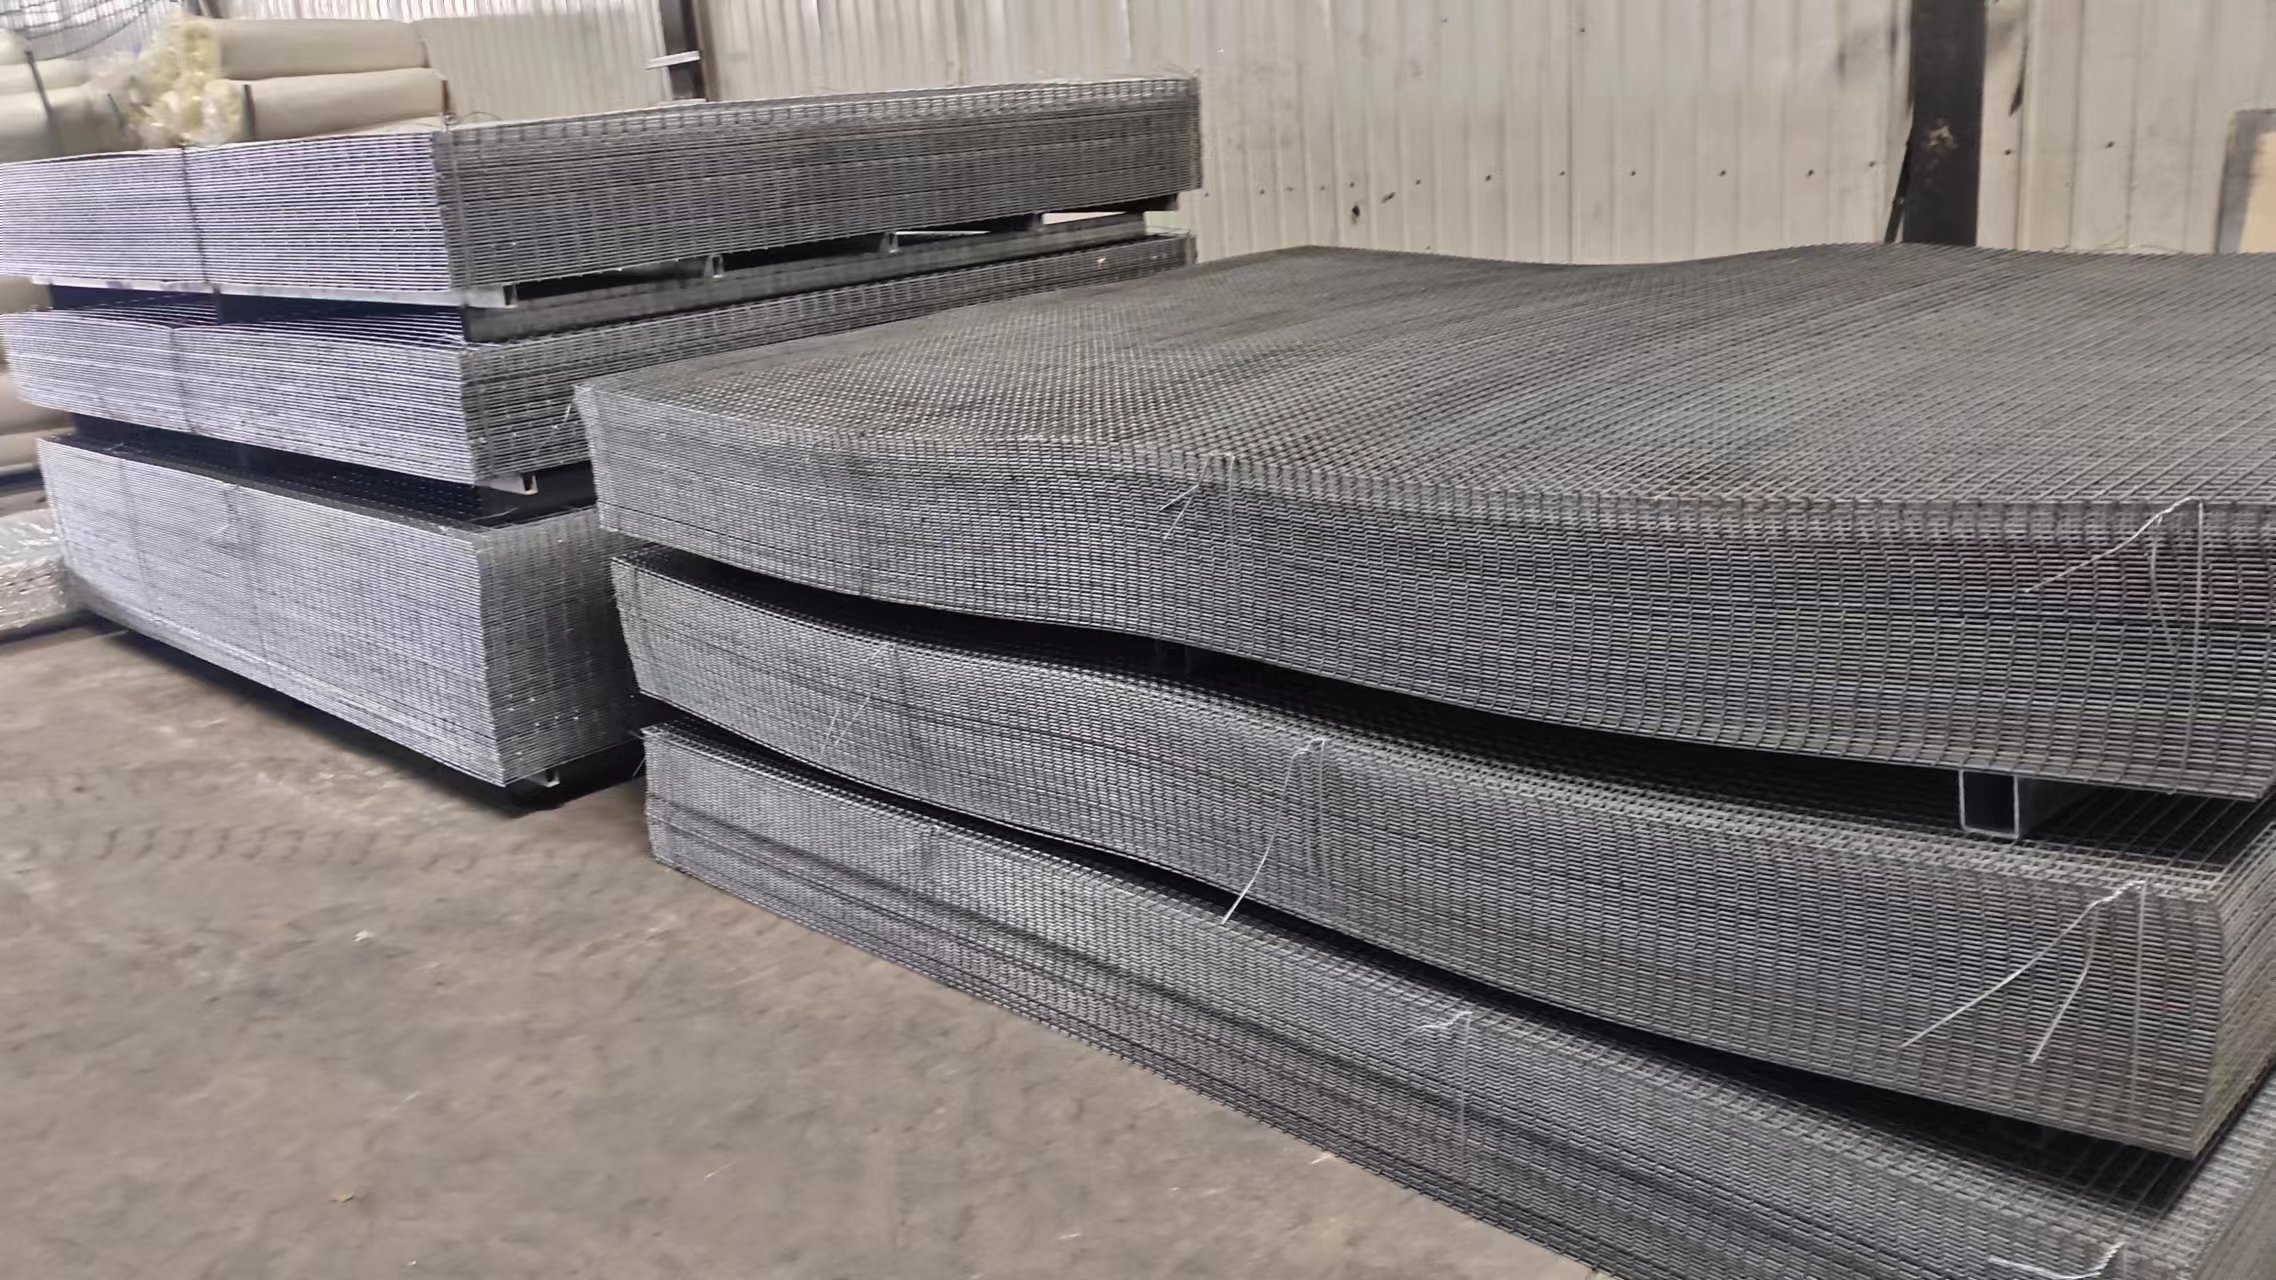 Customized Size Hot Galvanized Iron Roll Welded Wire Mesh for Farm